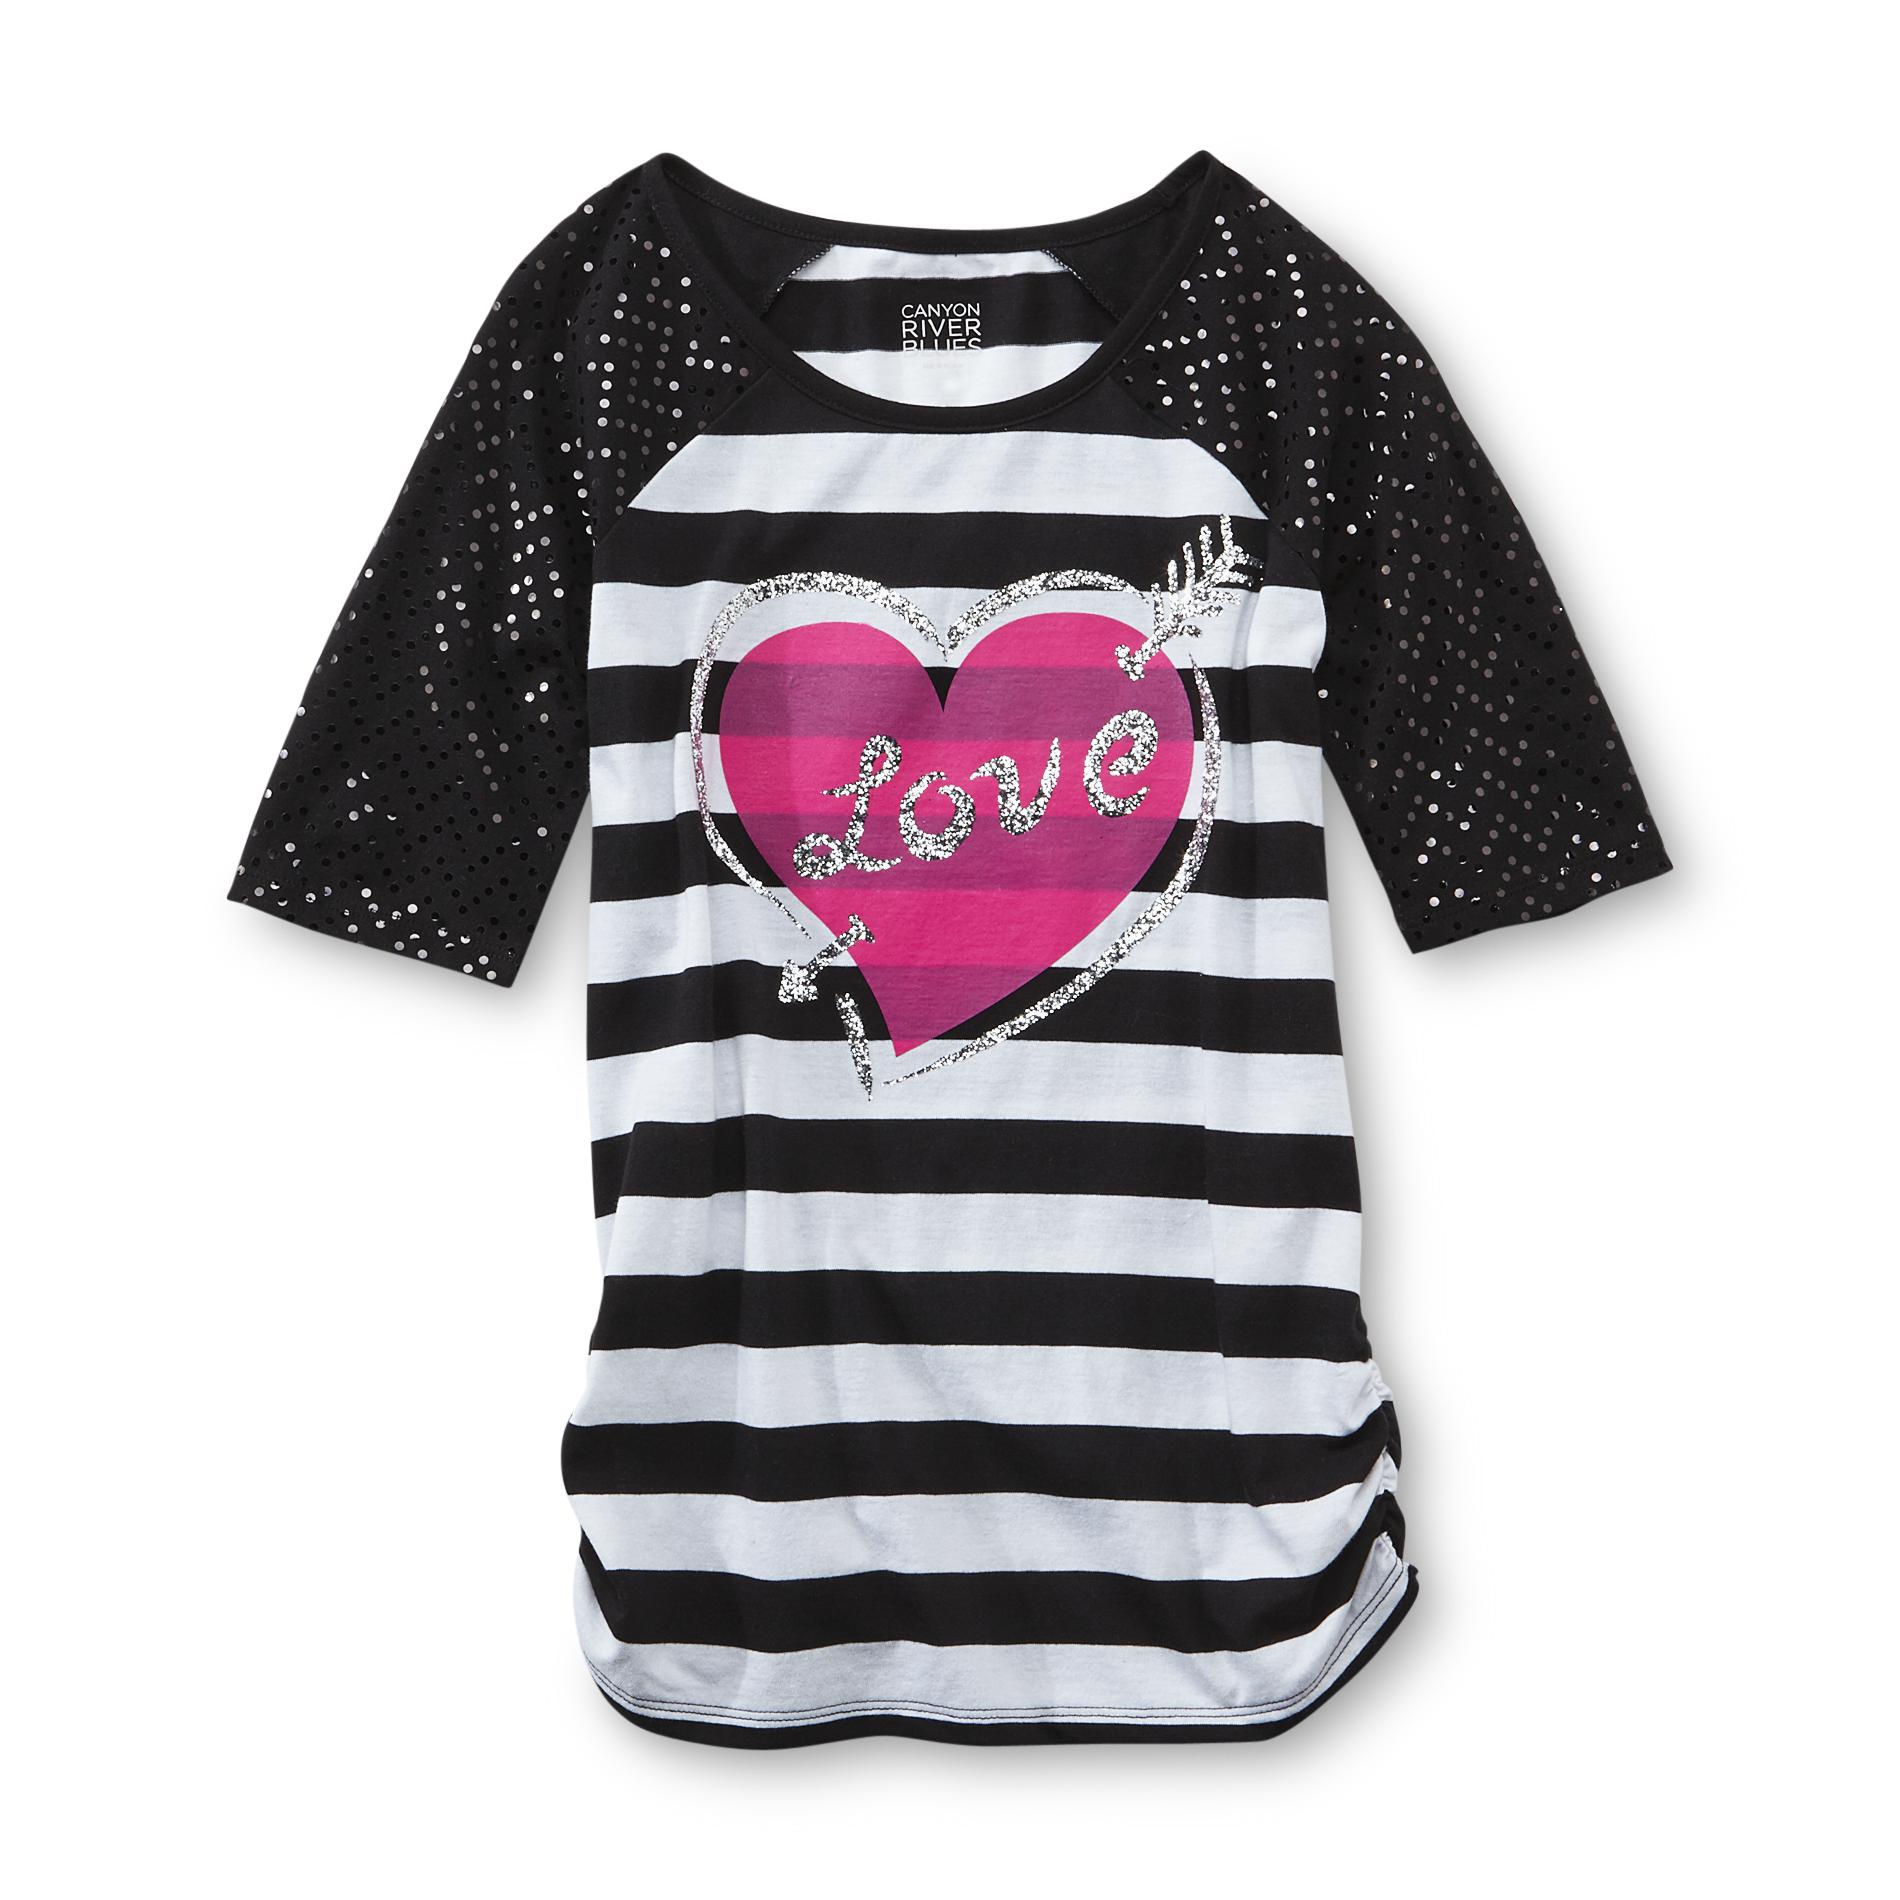 Canyon River Blues Girl's Raglan Sleeve Sequined Top - Love